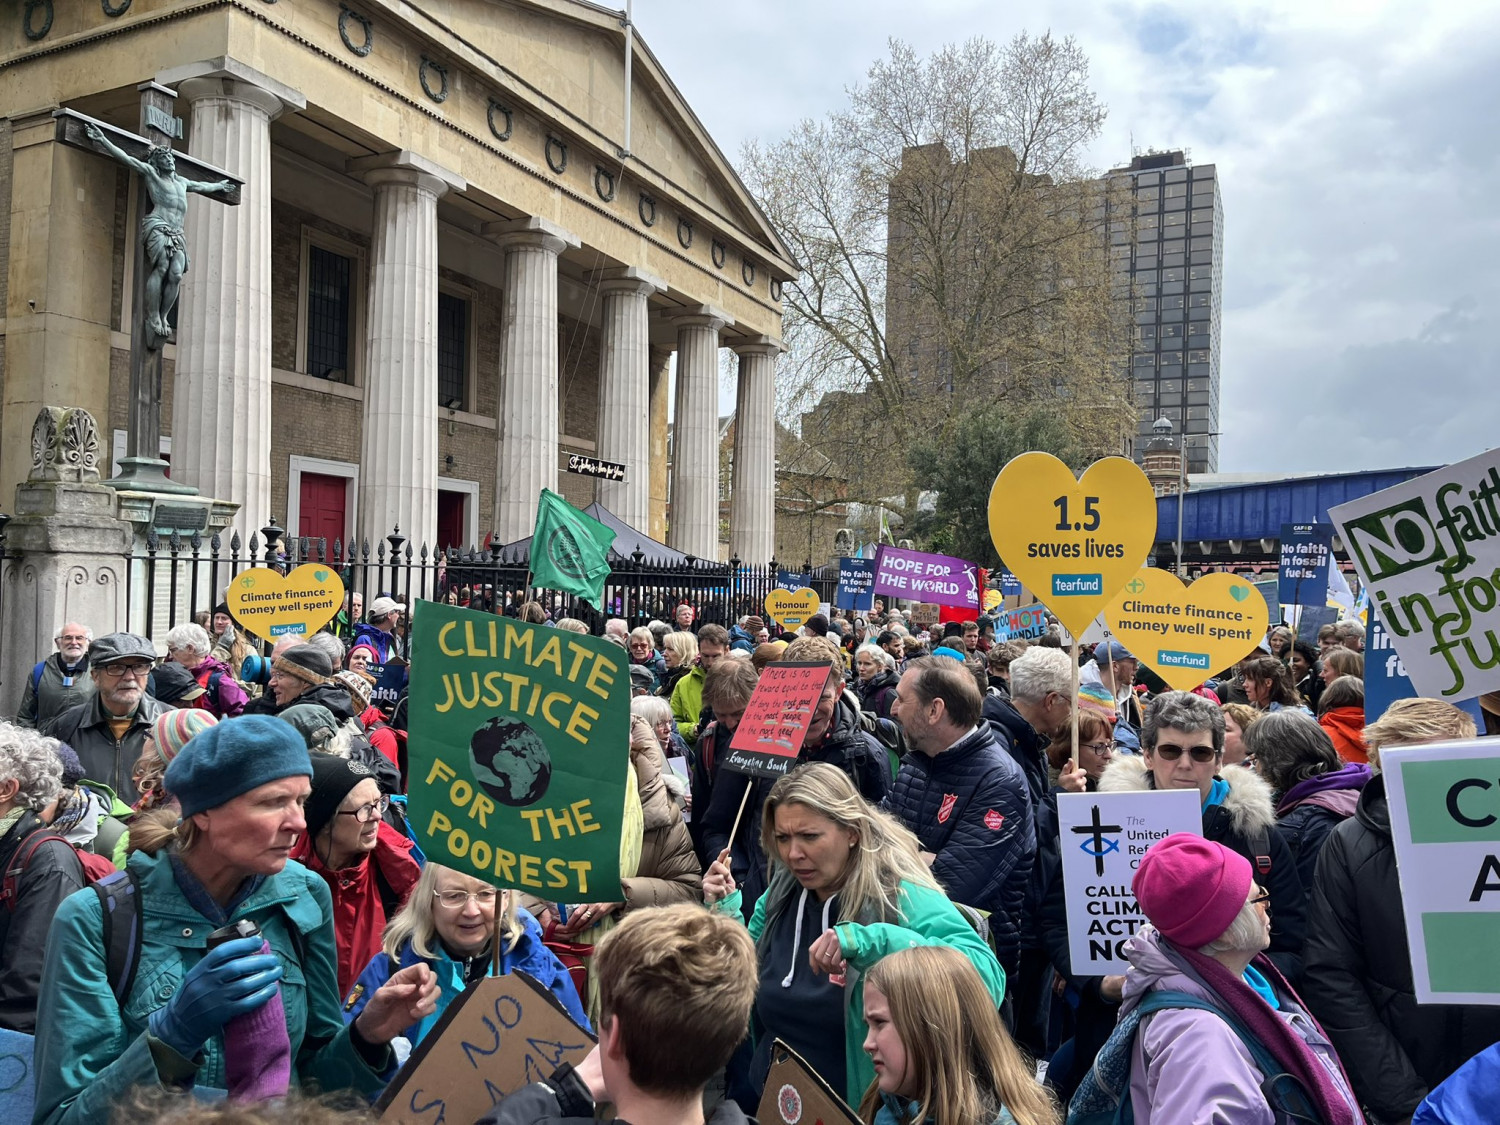 Photo showing crowd of protesters with placards reading 'Climate justice for the poorest'.